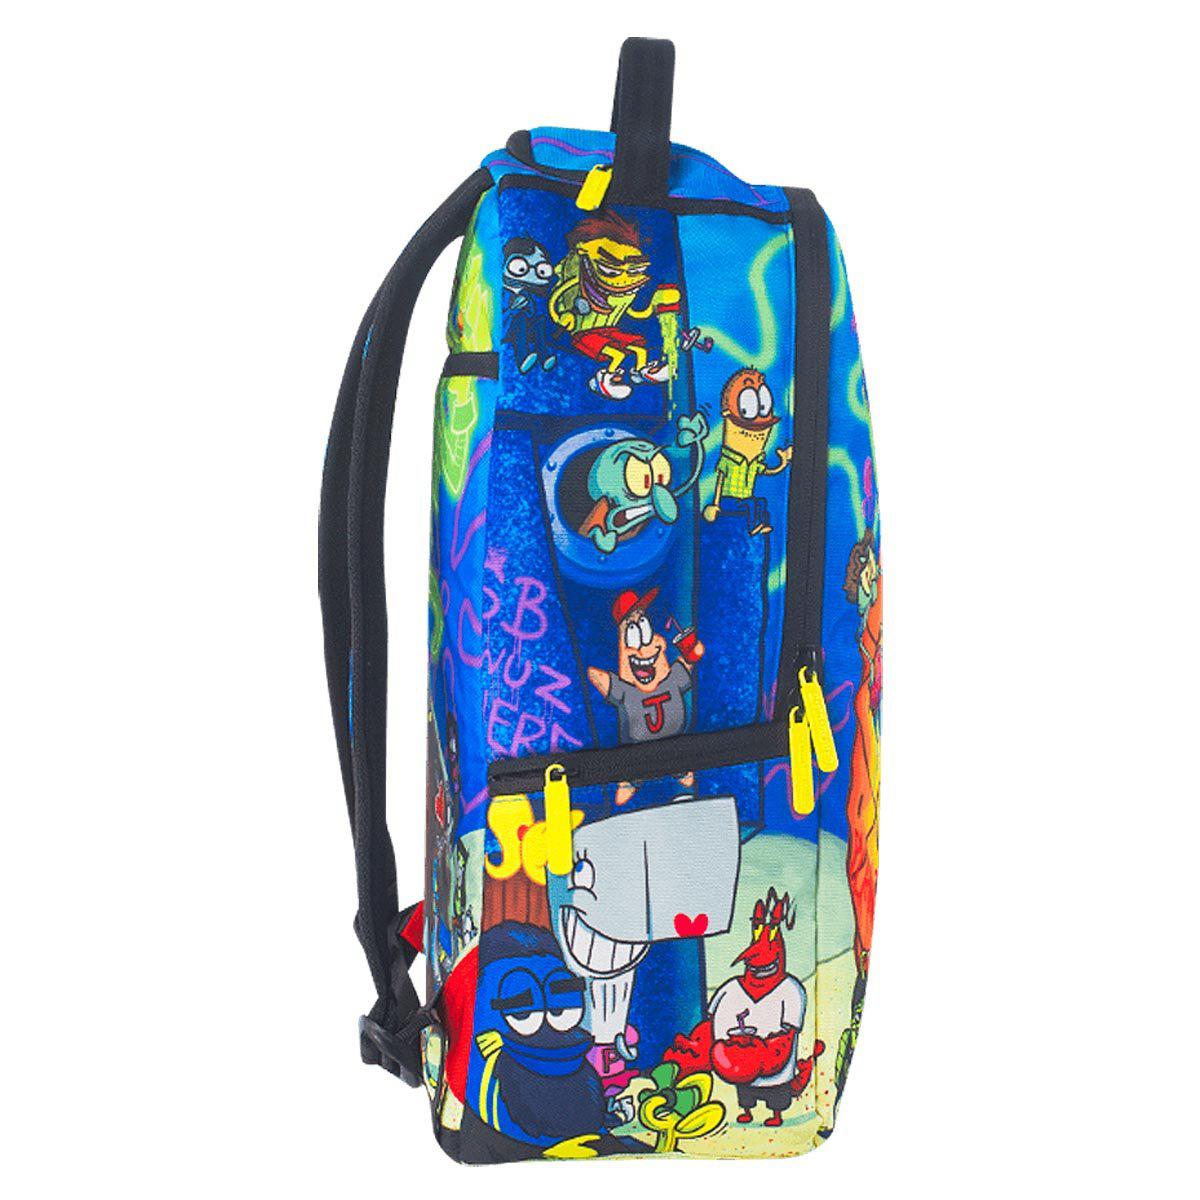 Sprayground Synthetic Spongebob Pineapple Party Backpack in Blue - Lyst